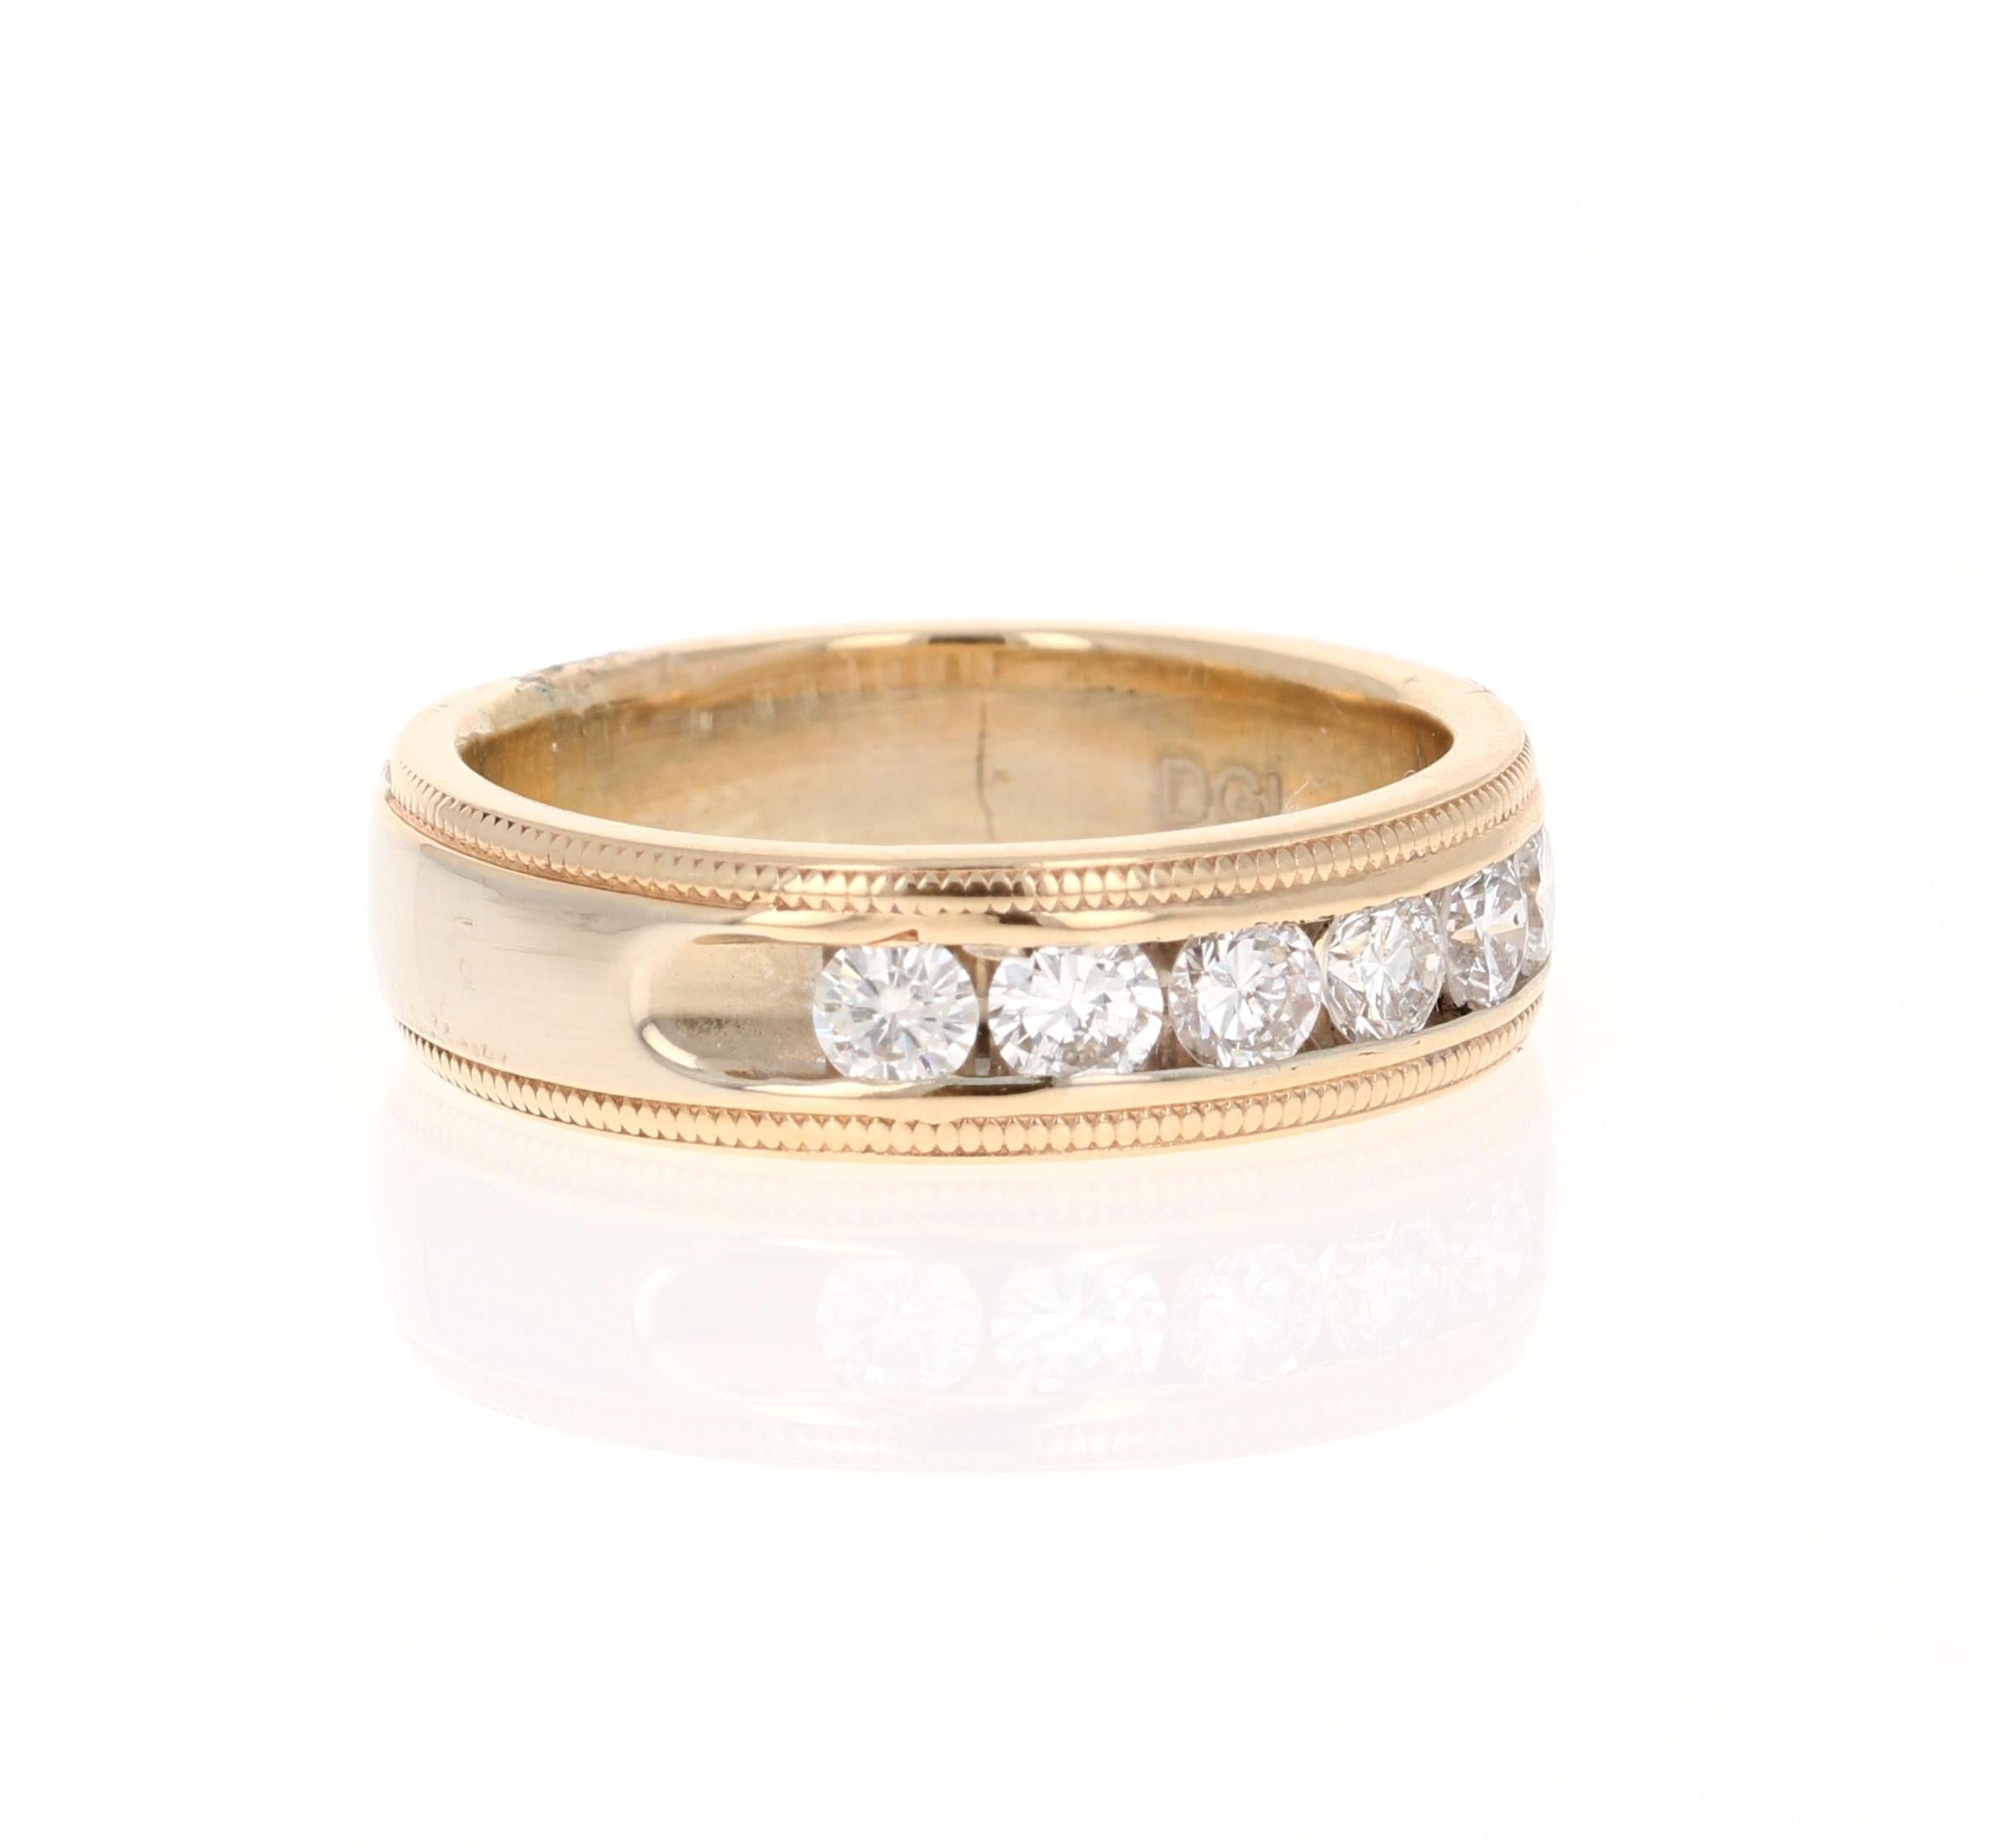 This ring has 7 Round Cut Diamonds that weigh 0.60 Carats (Clarity: SI1 Color: F) 
It has a gold gram weight of approximately 6.1 grams and is set in 14 Karat Yellow Gold.
Ring size is 7 and can be re-sized, free of charge.